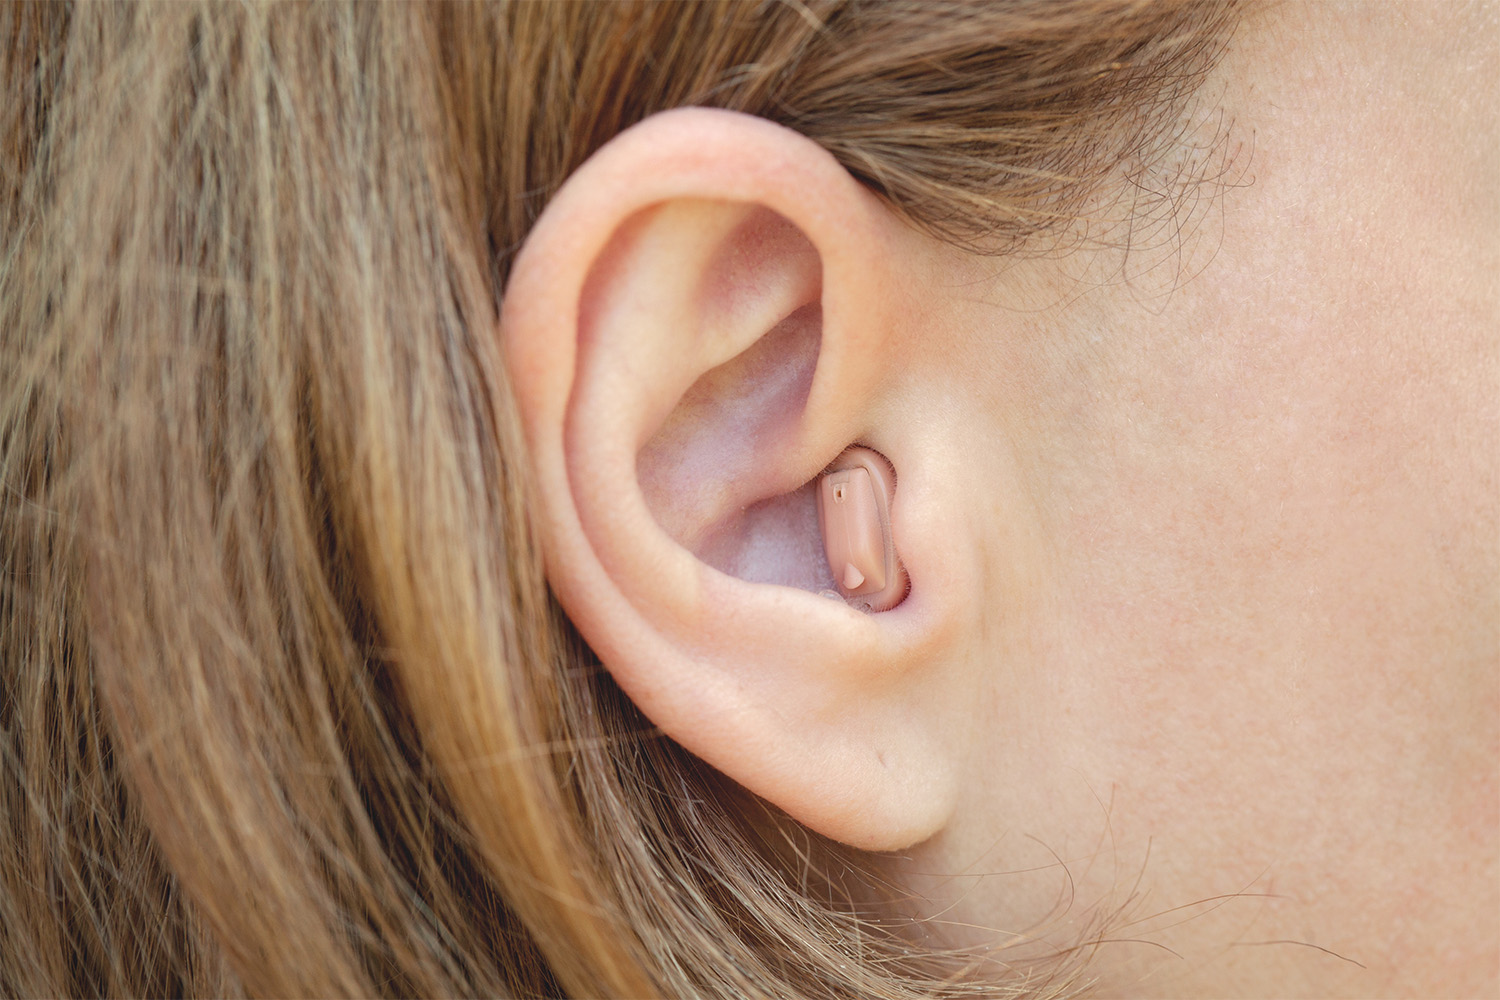 SALE PENDING: Hearing Aid Service Business